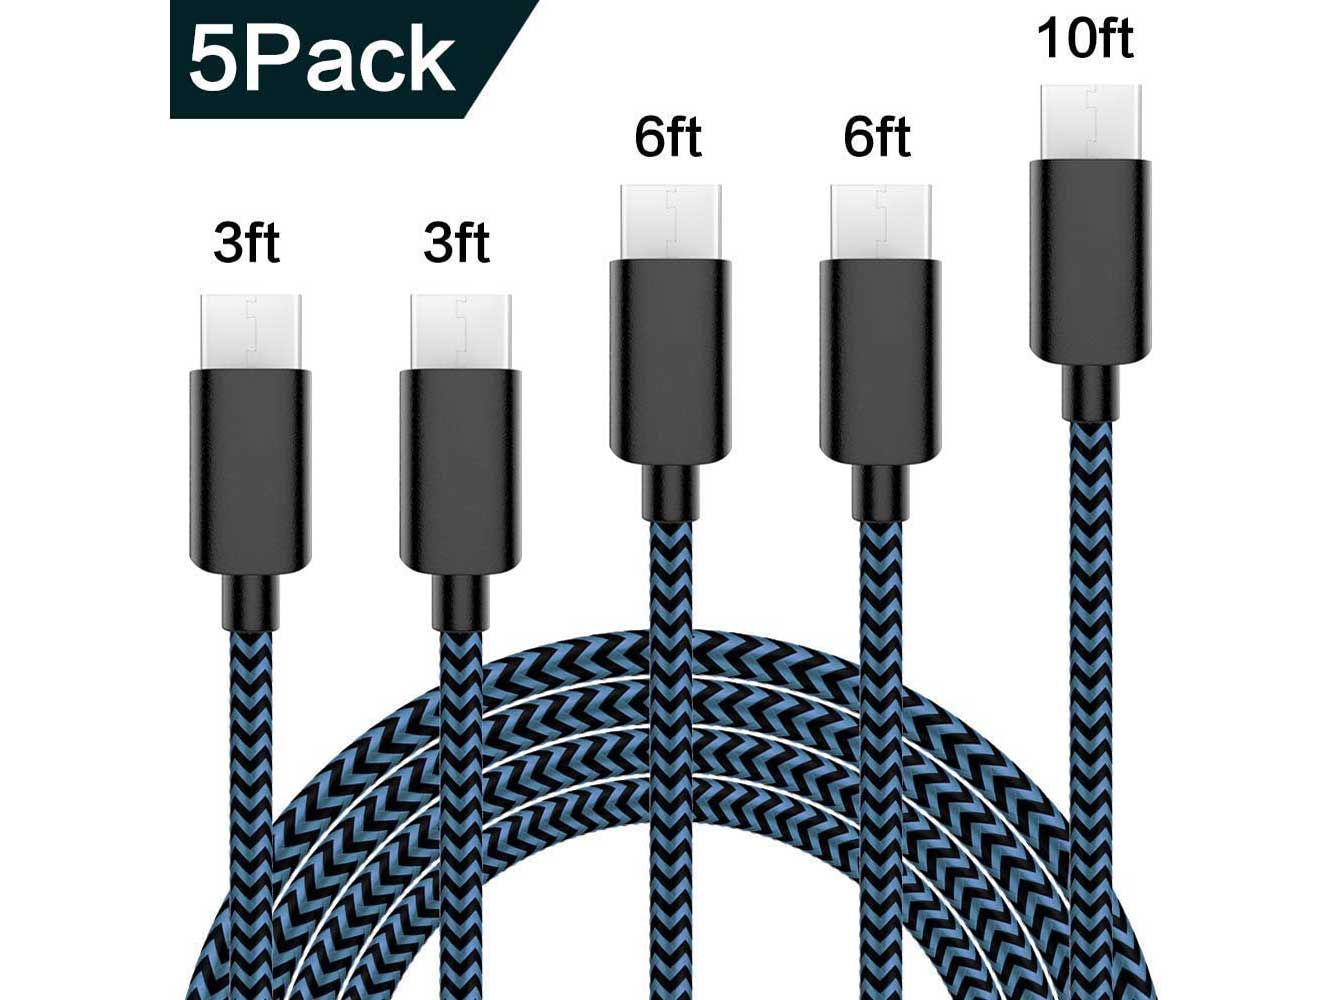 USB Type C Cable 5Pack (3/3/6/6/10FT) Nylon Braided USB C Cable Fast Charger Charging Cord Compatible Samsung Galaxy S9 S8 Note 9 Note 8 Plus,LG V30 G6 G5 V20,Google Pixel, Moto Z2 and More